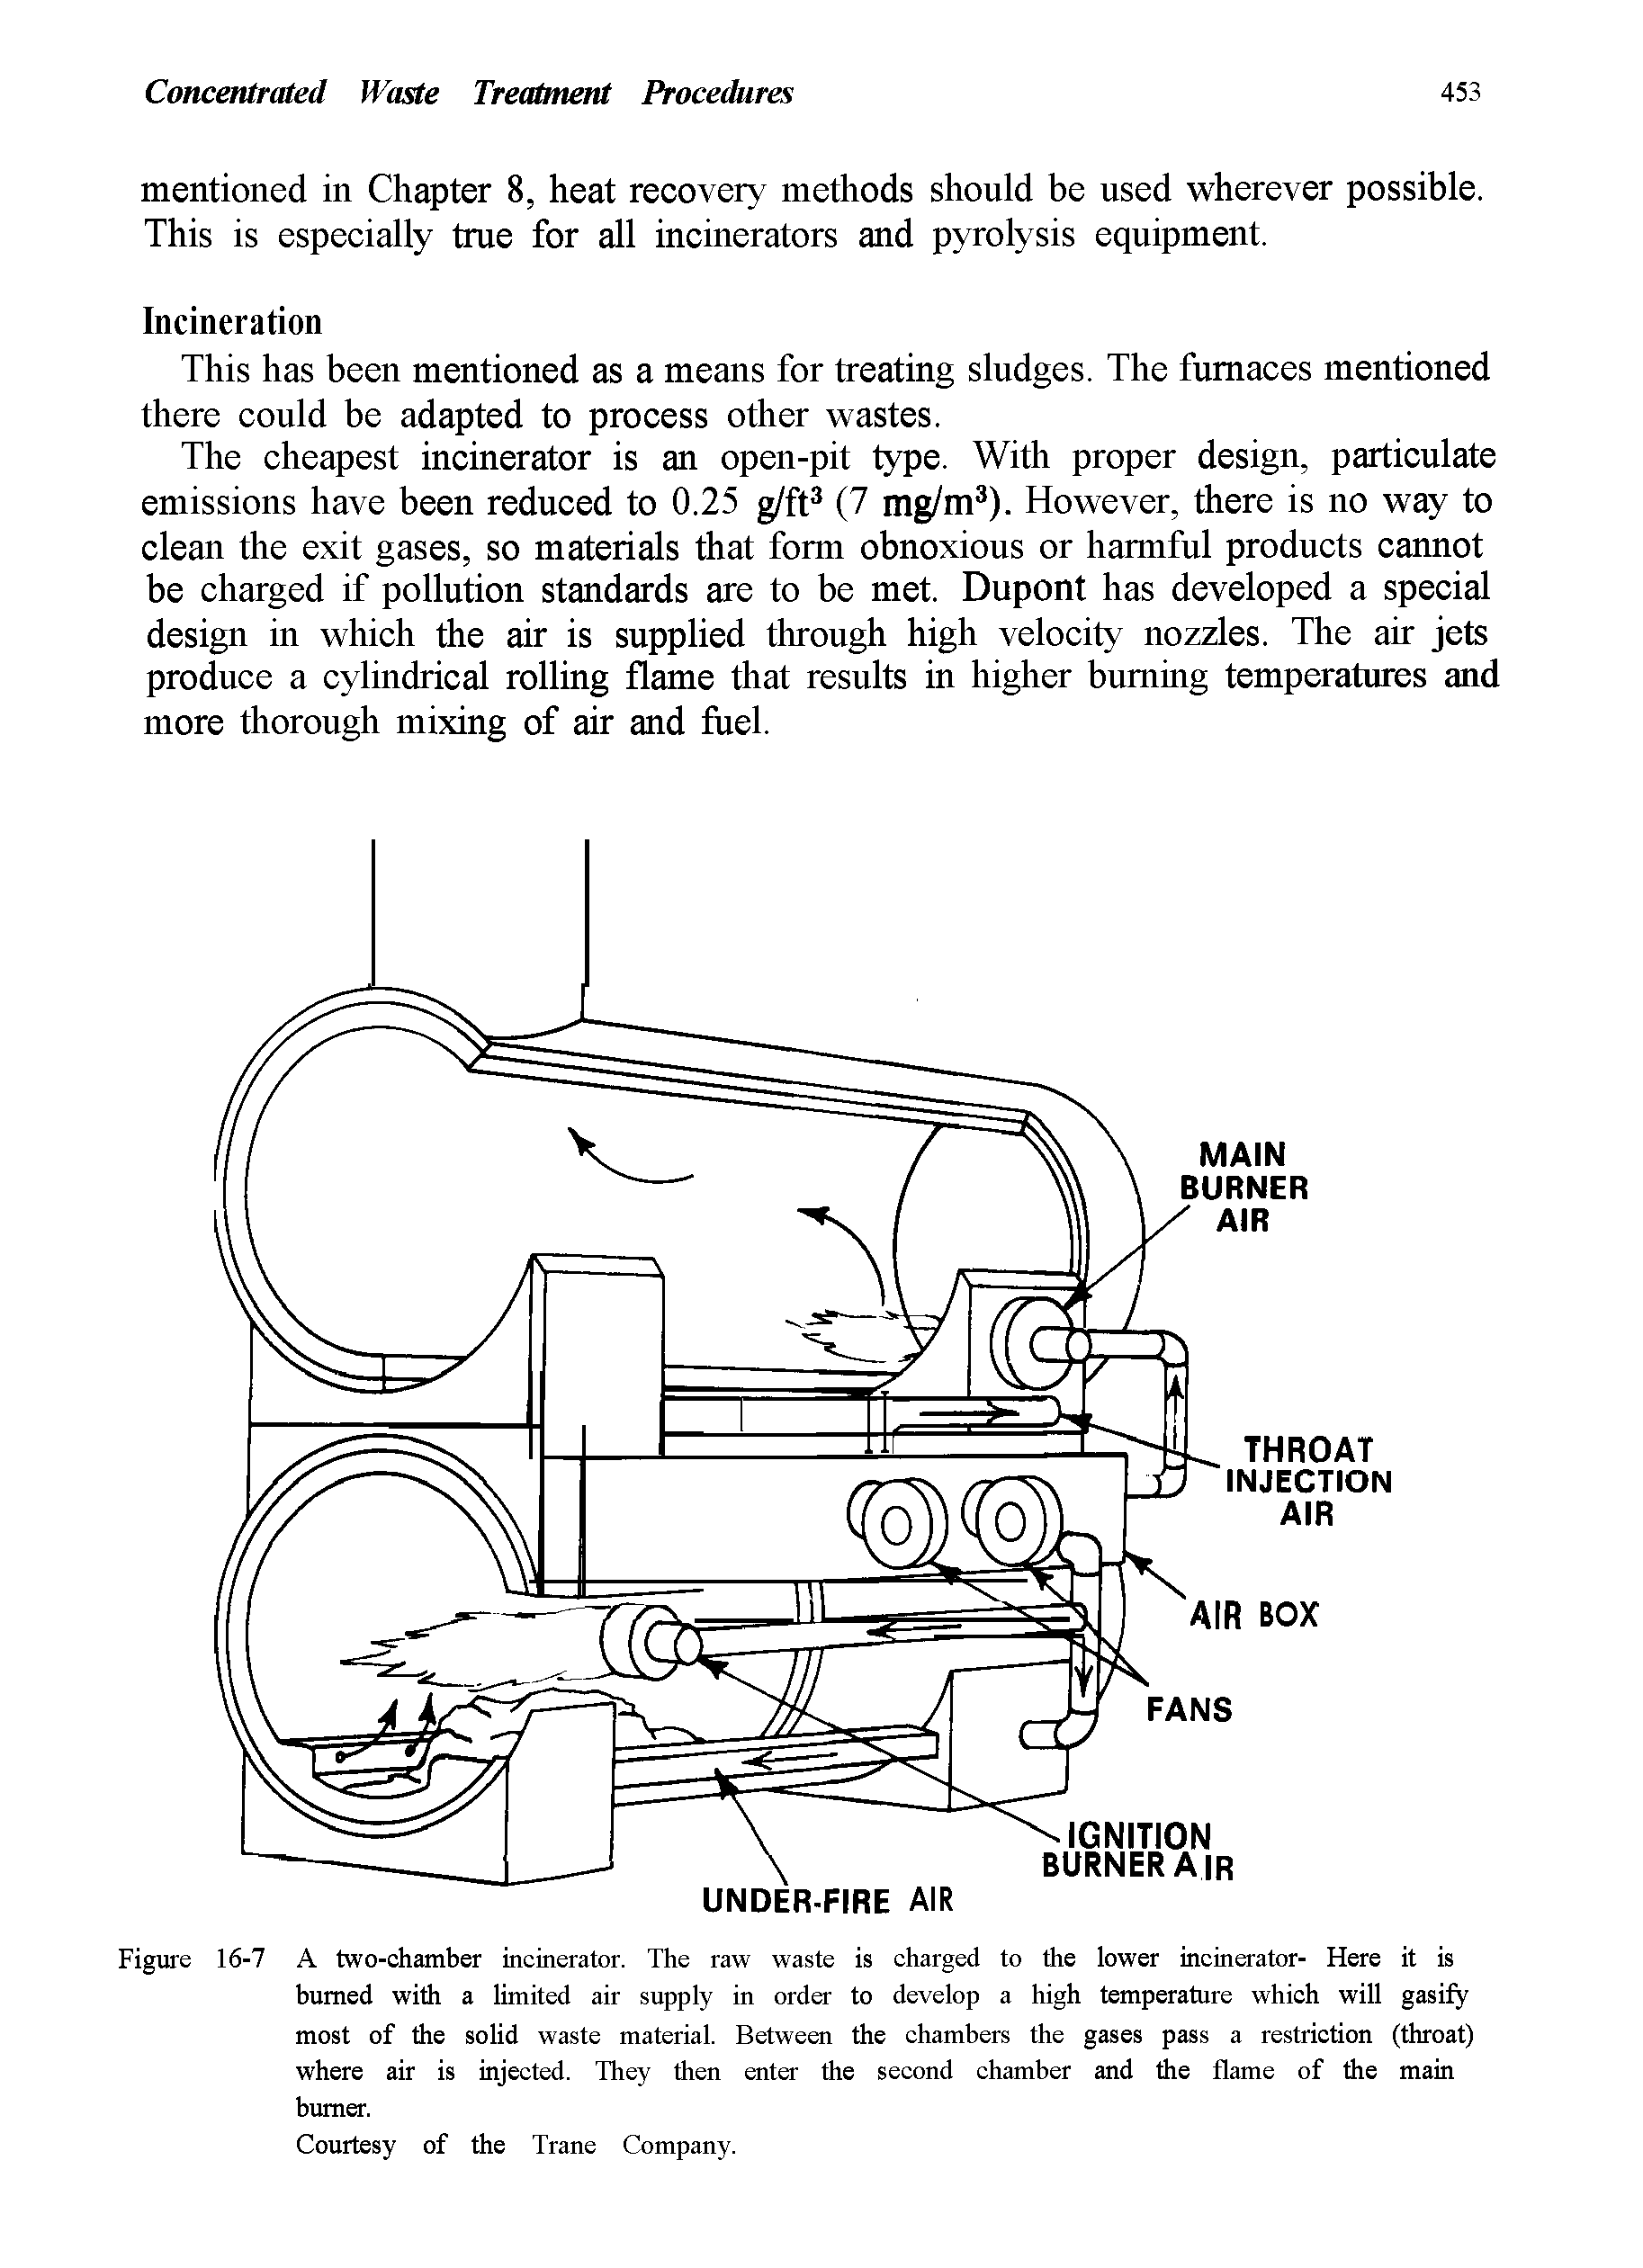 Figure 16-7 A two-chamber incinerator. The raw waste is charged to the lower incinerator- Here it is burned with a limited air supply in order to develop a high temperature which will gasify most of the solid waste material. Between the chambers the gases pass a restriction (throat) where air is injected. They then enter the second chamber and the flame of the main burner.